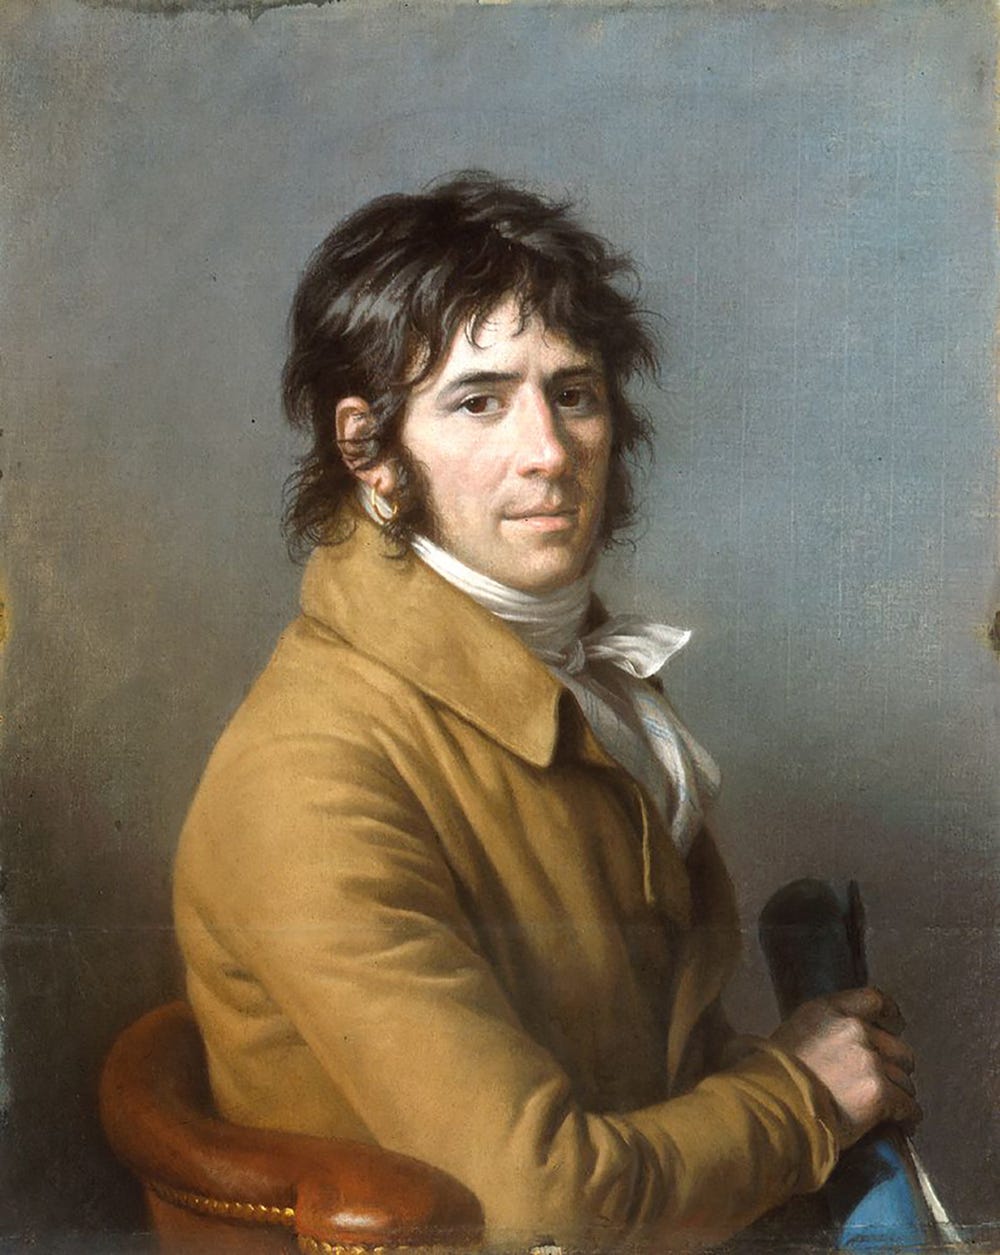 pastel of a man with brown hair looking out to the viewer